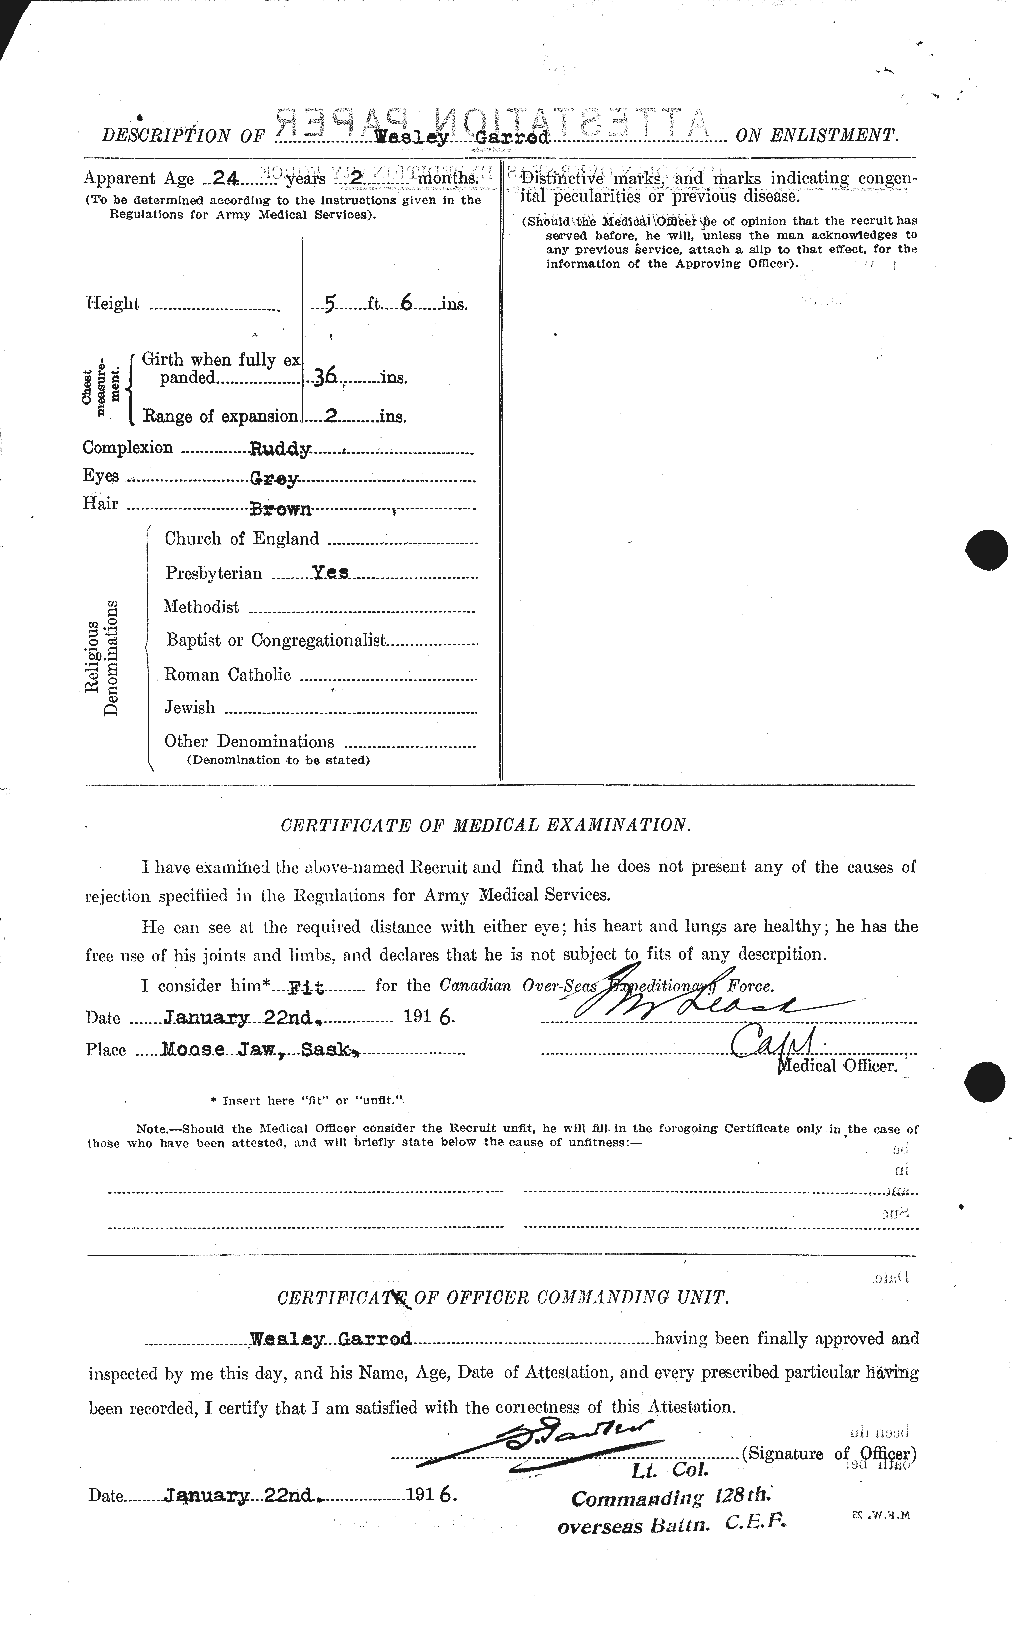 Personnel Records of the First World War - CEF 343455b